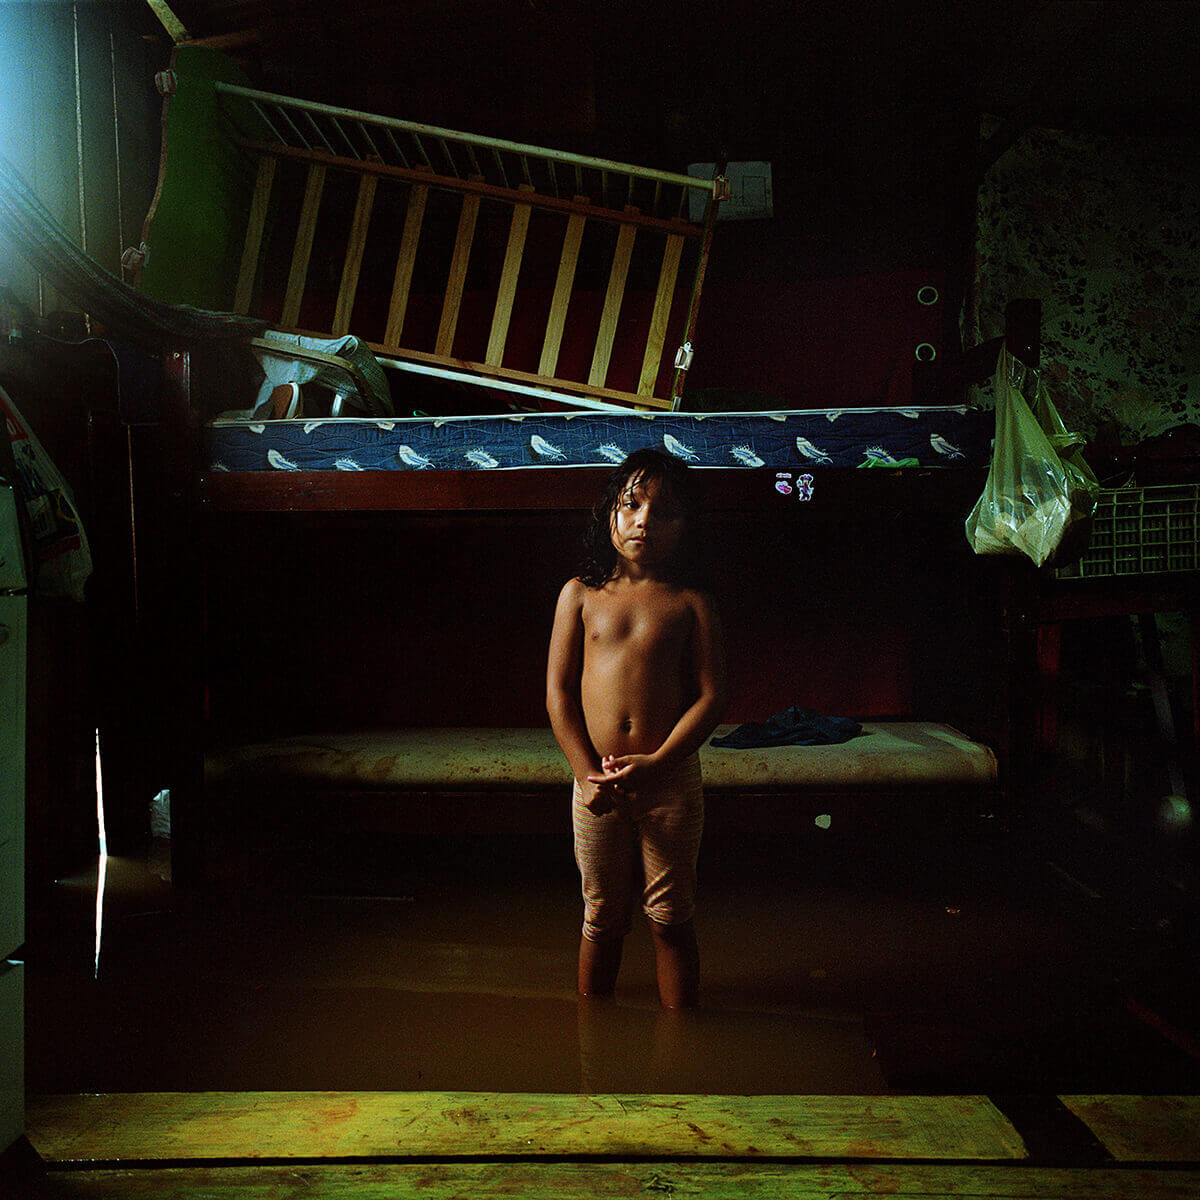 A photo of a girl standing in a bedroom that has been flooded with dark, murky water. He is staring directly at the camera.